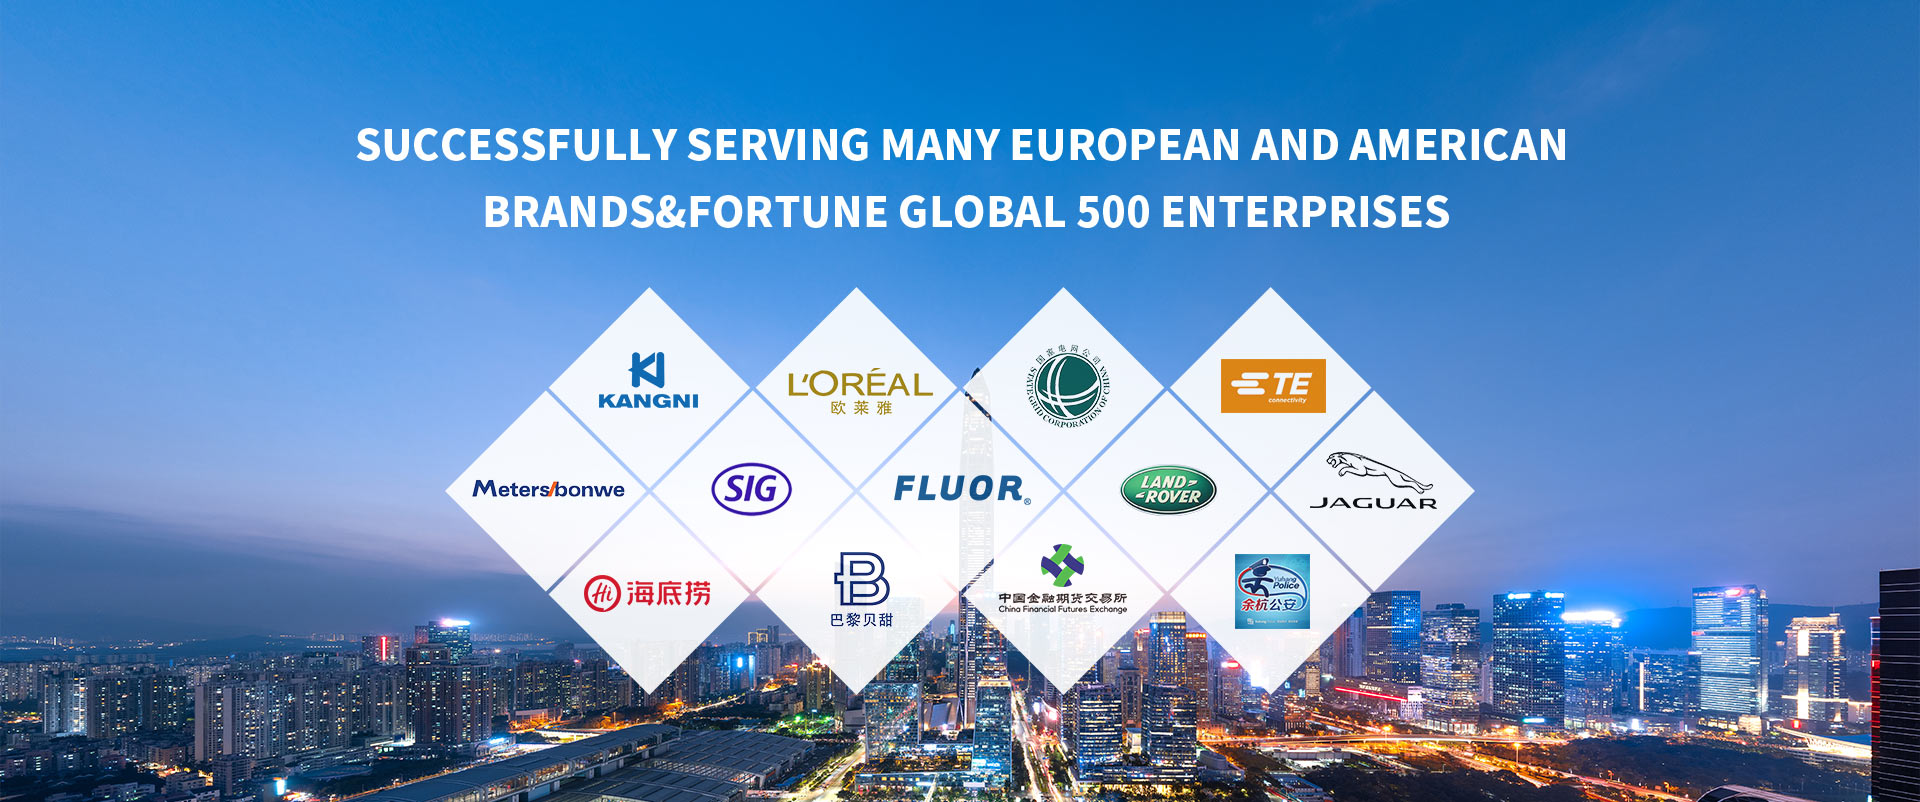 Successfully Serving Many European and American Brands&Fortune Global 500 Enterprises